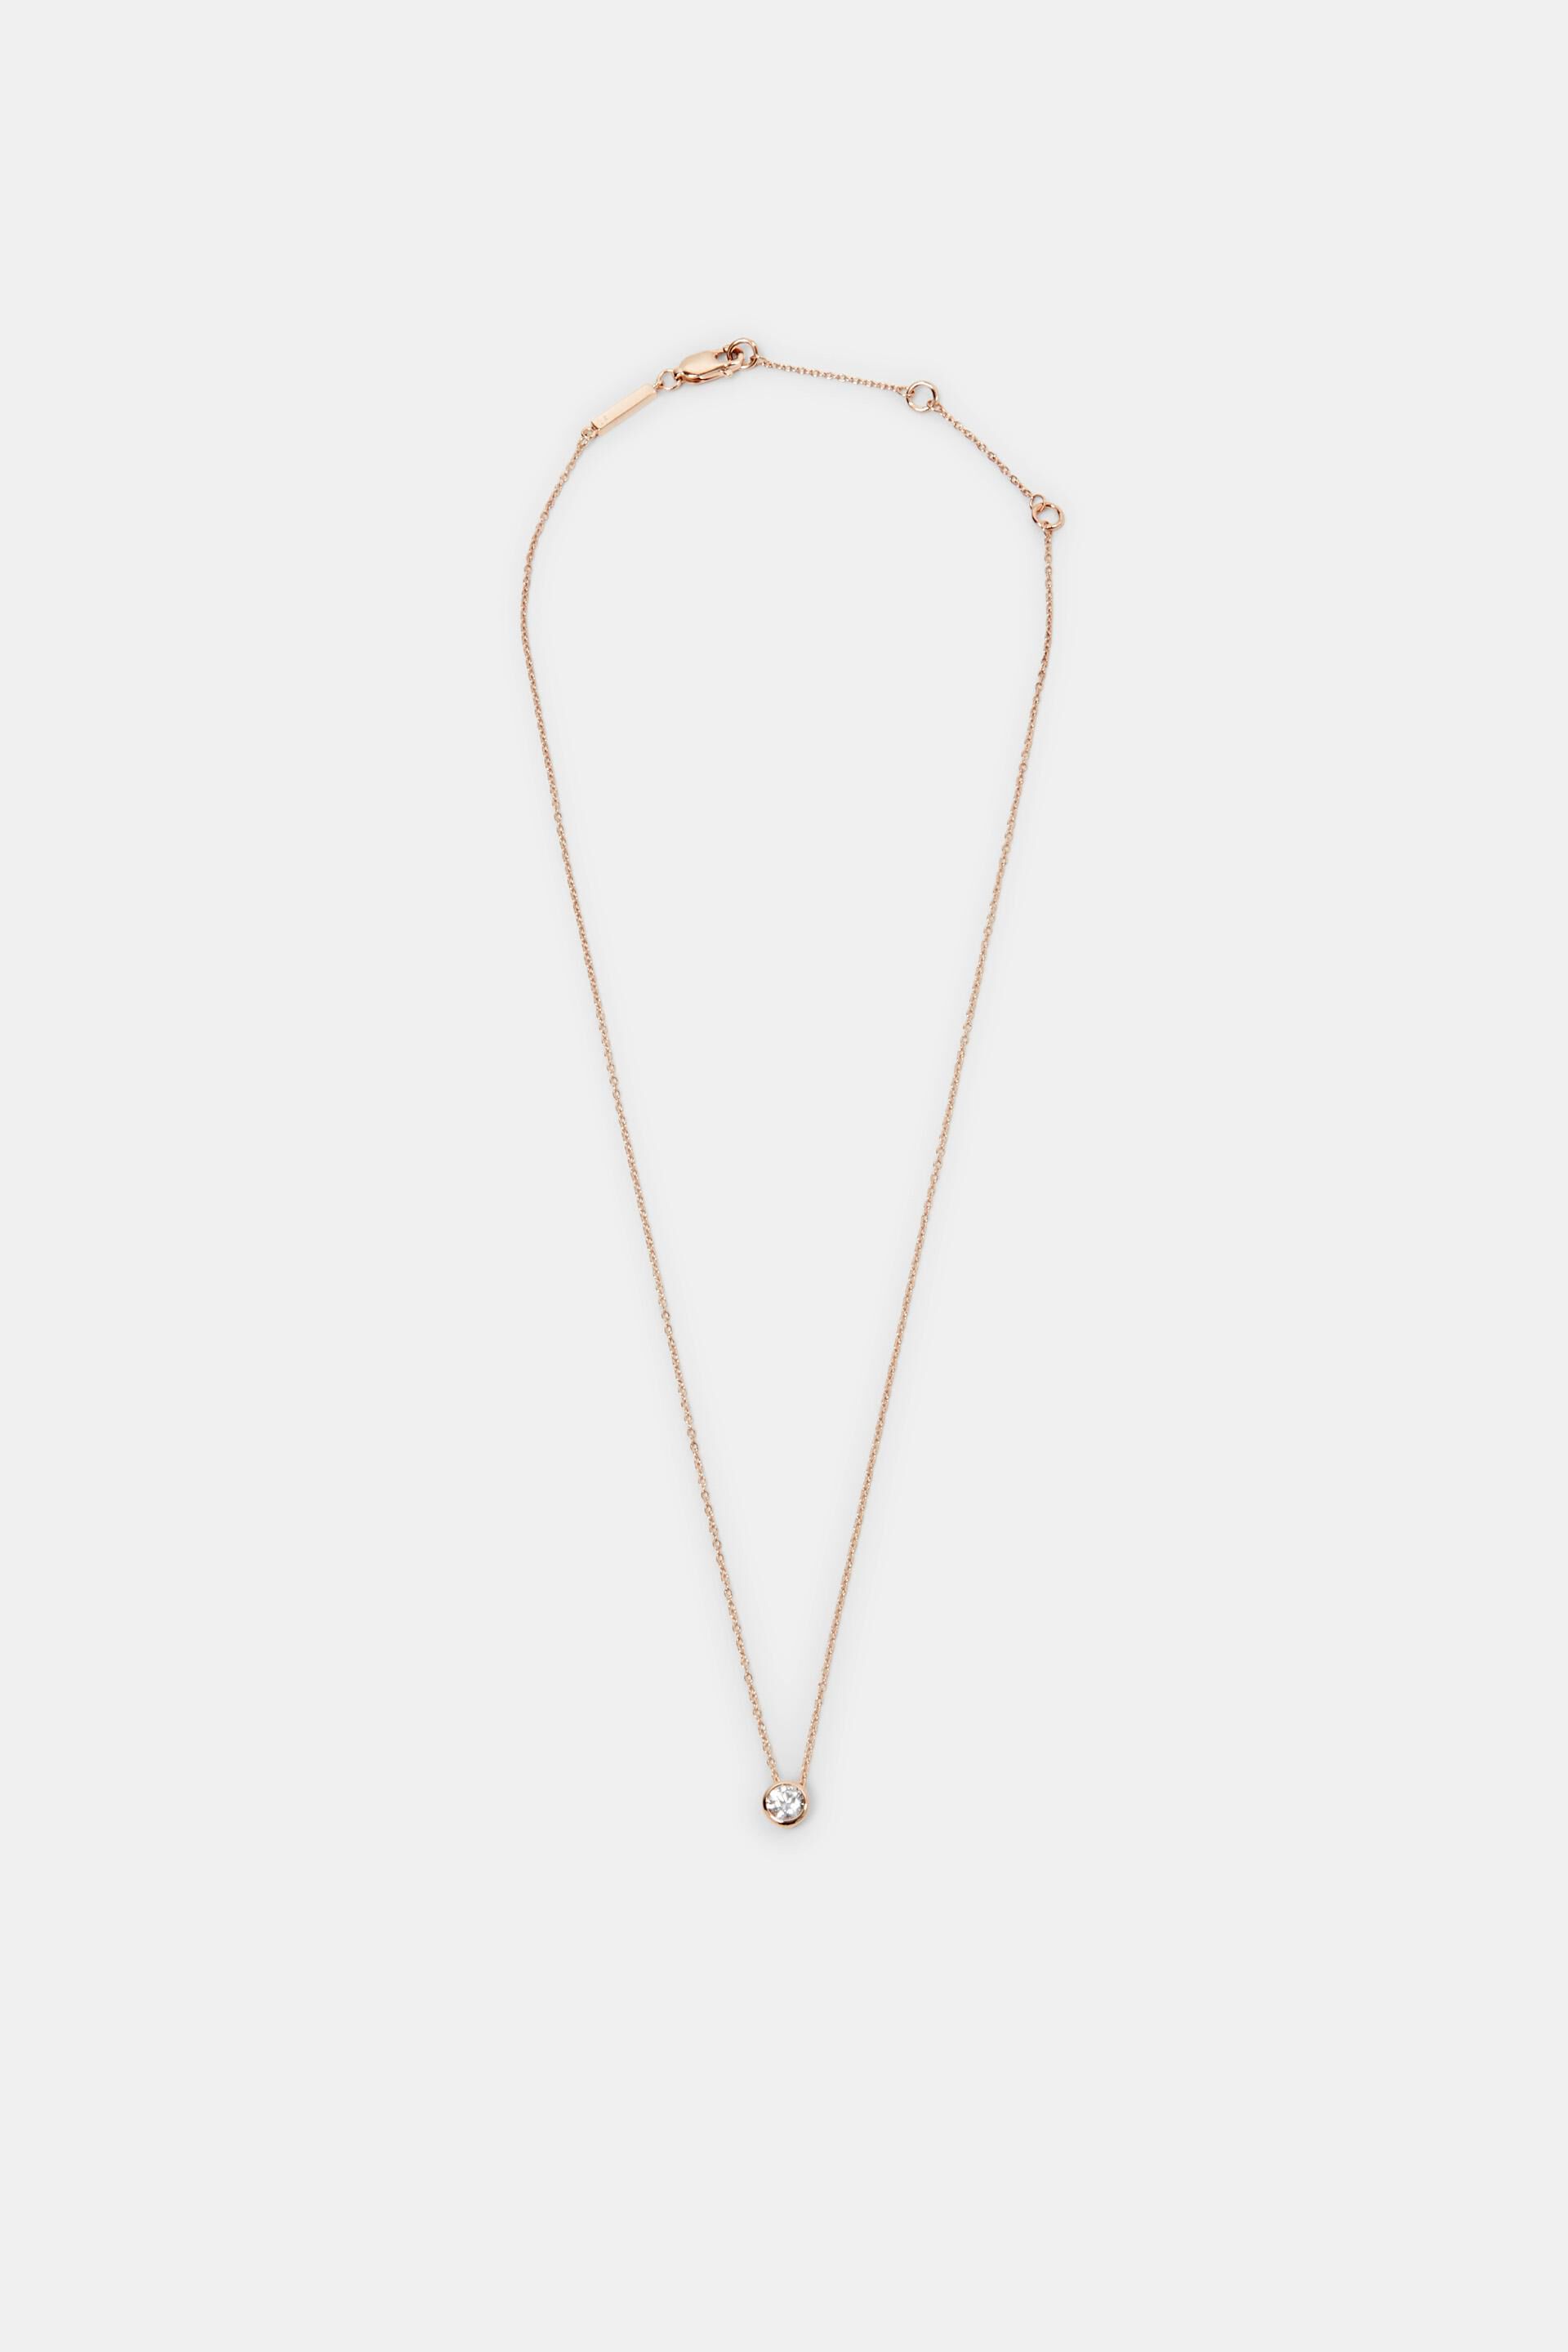 Esprit Online Store Necklace with zirconia, sterling silver